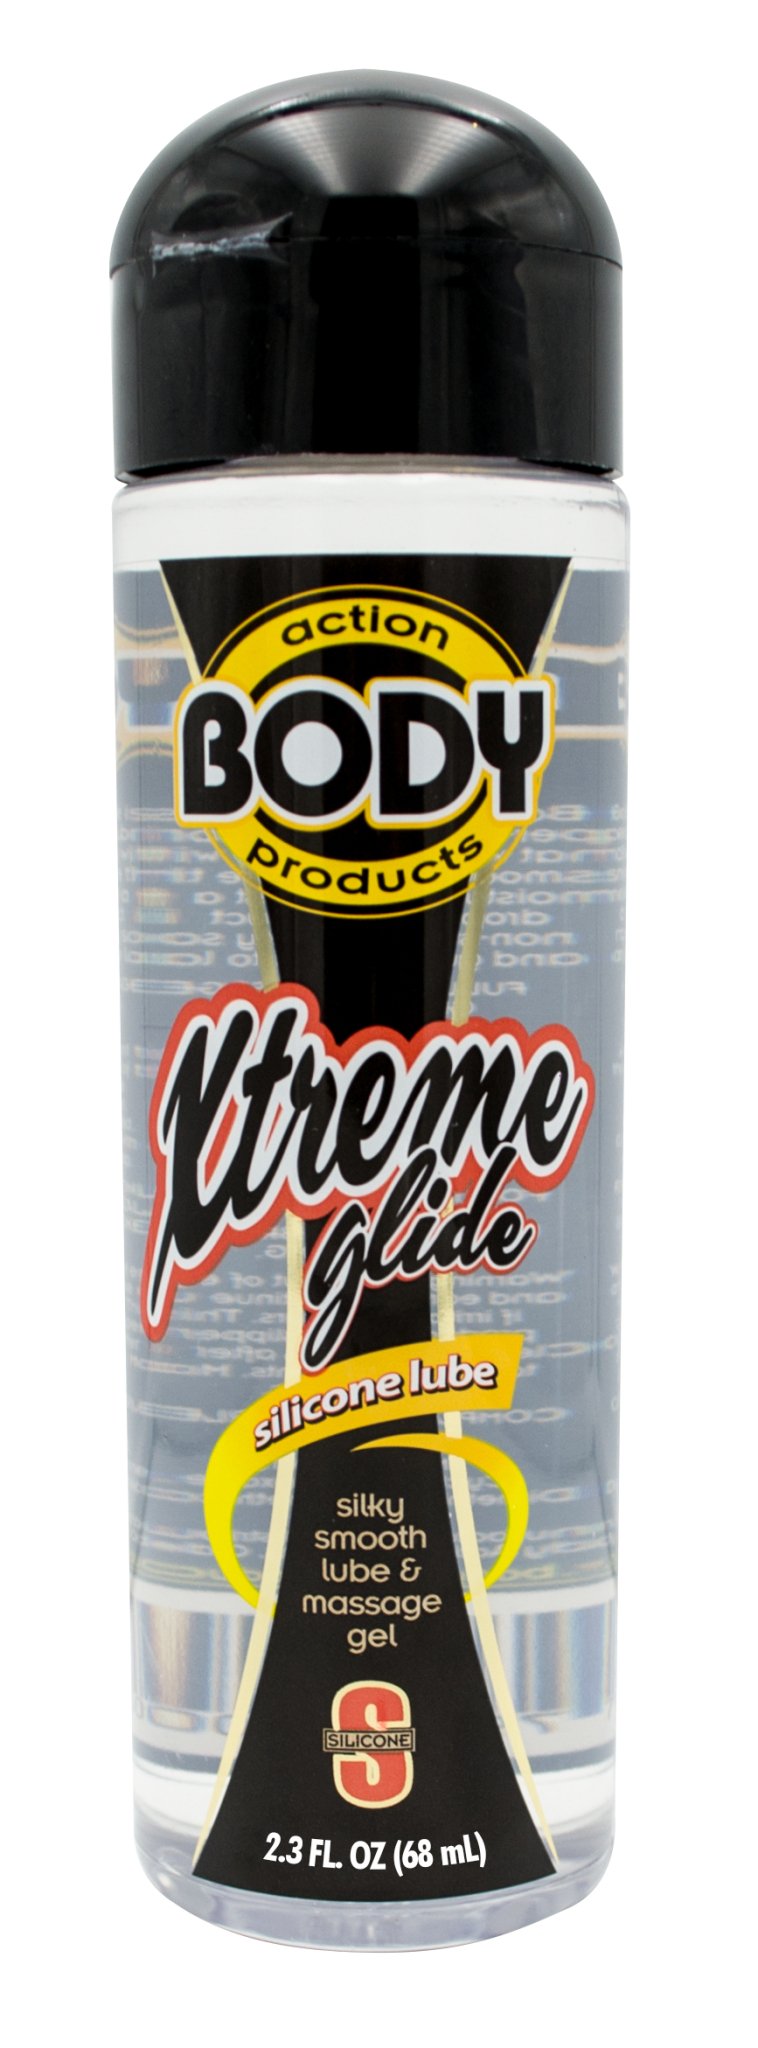 Body Action Xtreme Glide